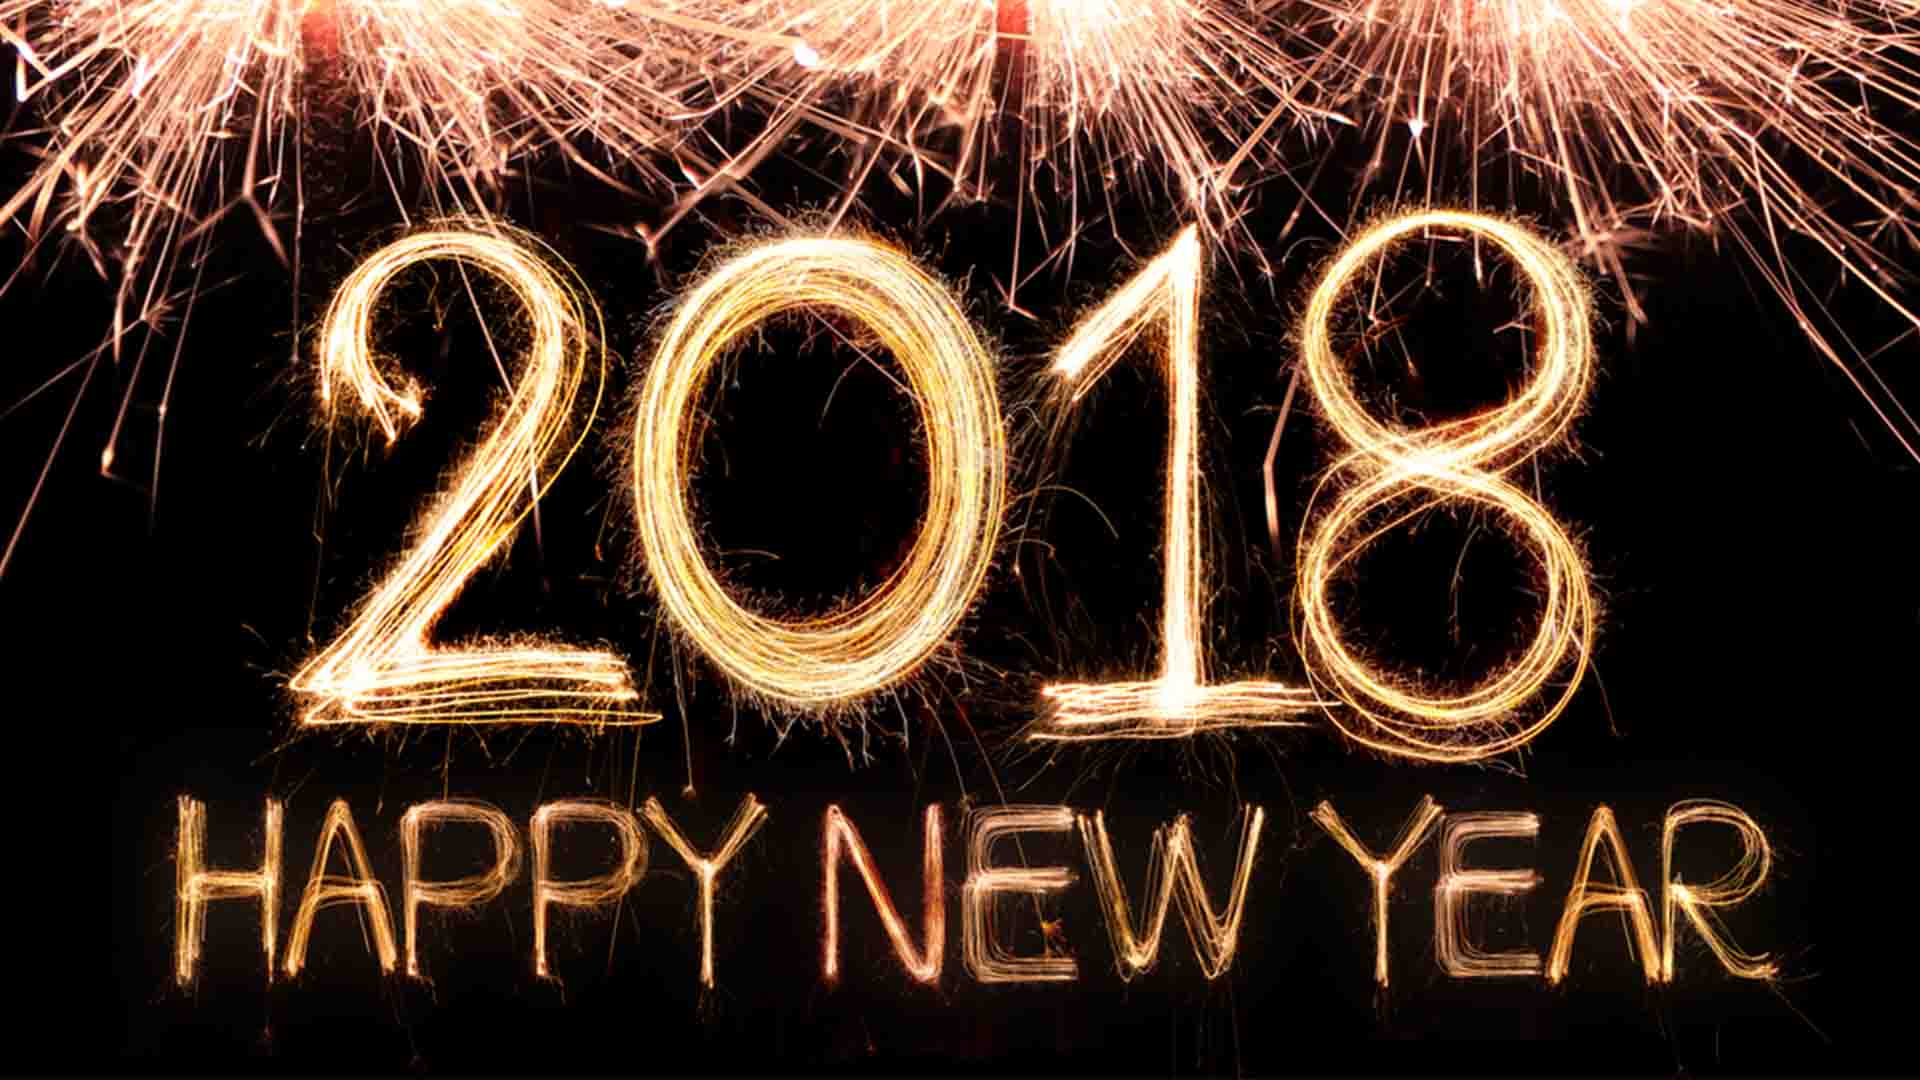 Advance Happy New Year 2018 Image Download